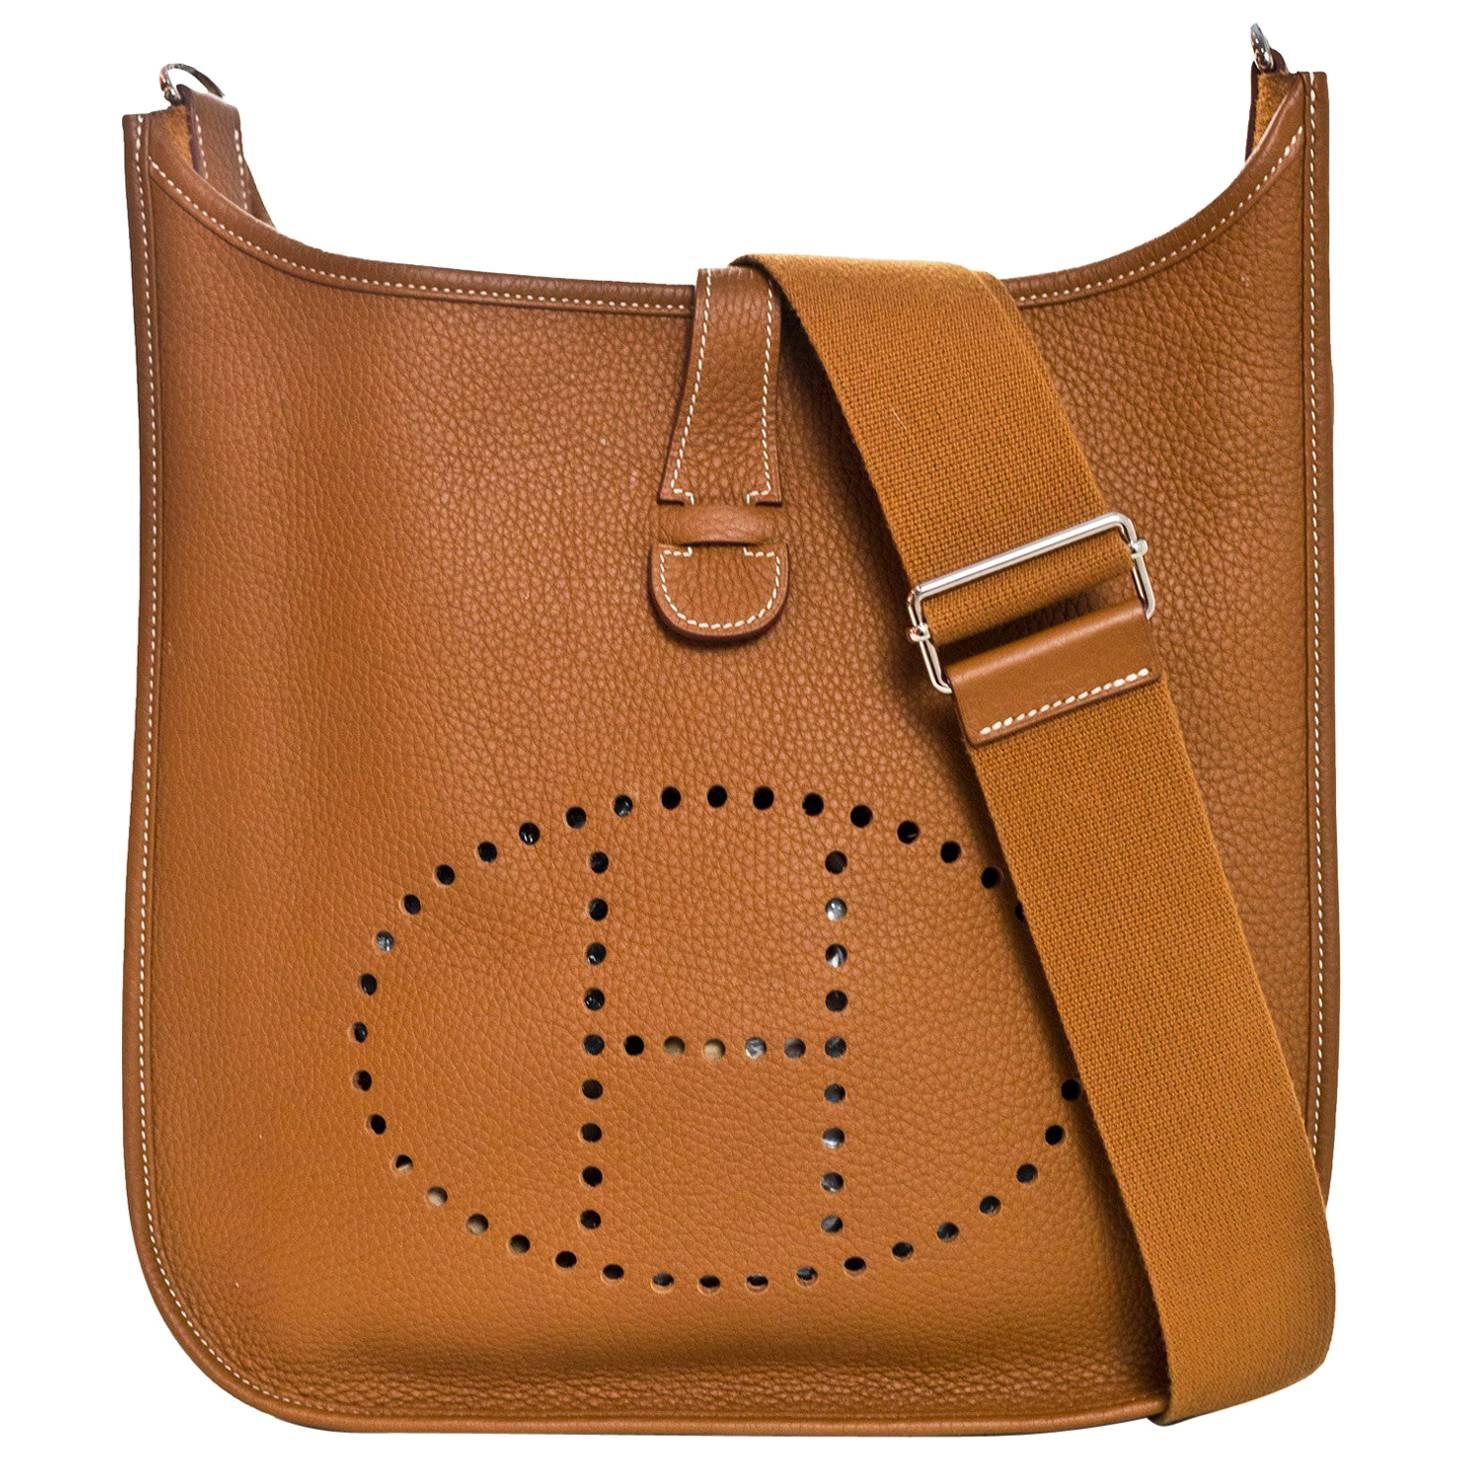 Hermes '11 Tan Gold Clemence Leather Evelyne III GM Bag with Box & DB